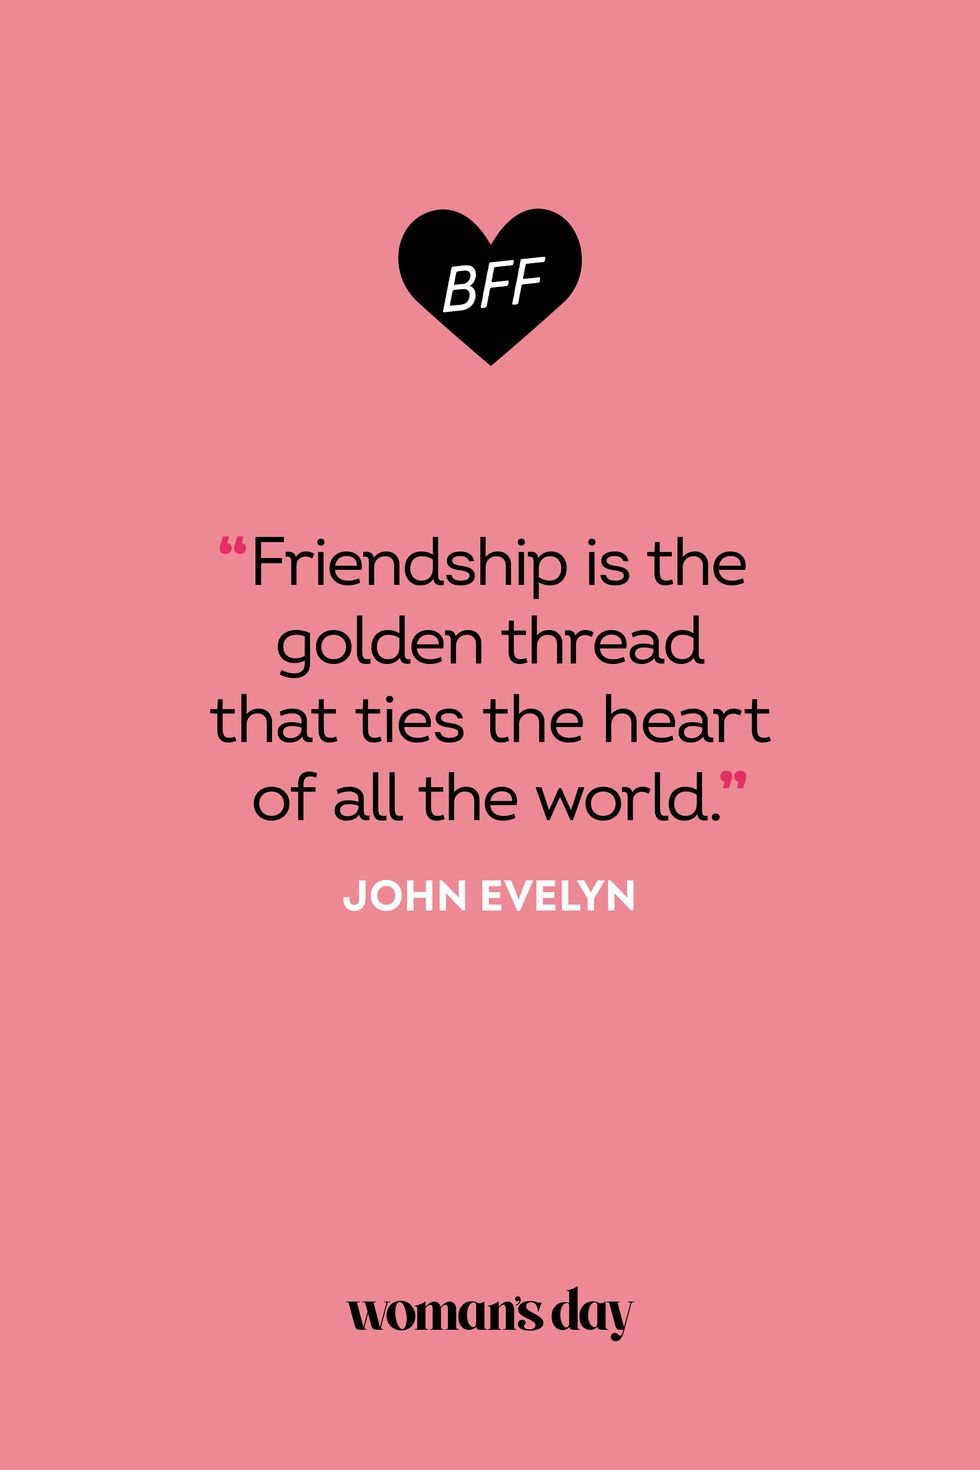 101 Best Friend Quotes to Celebrate Your BFF's Friendship - Parade